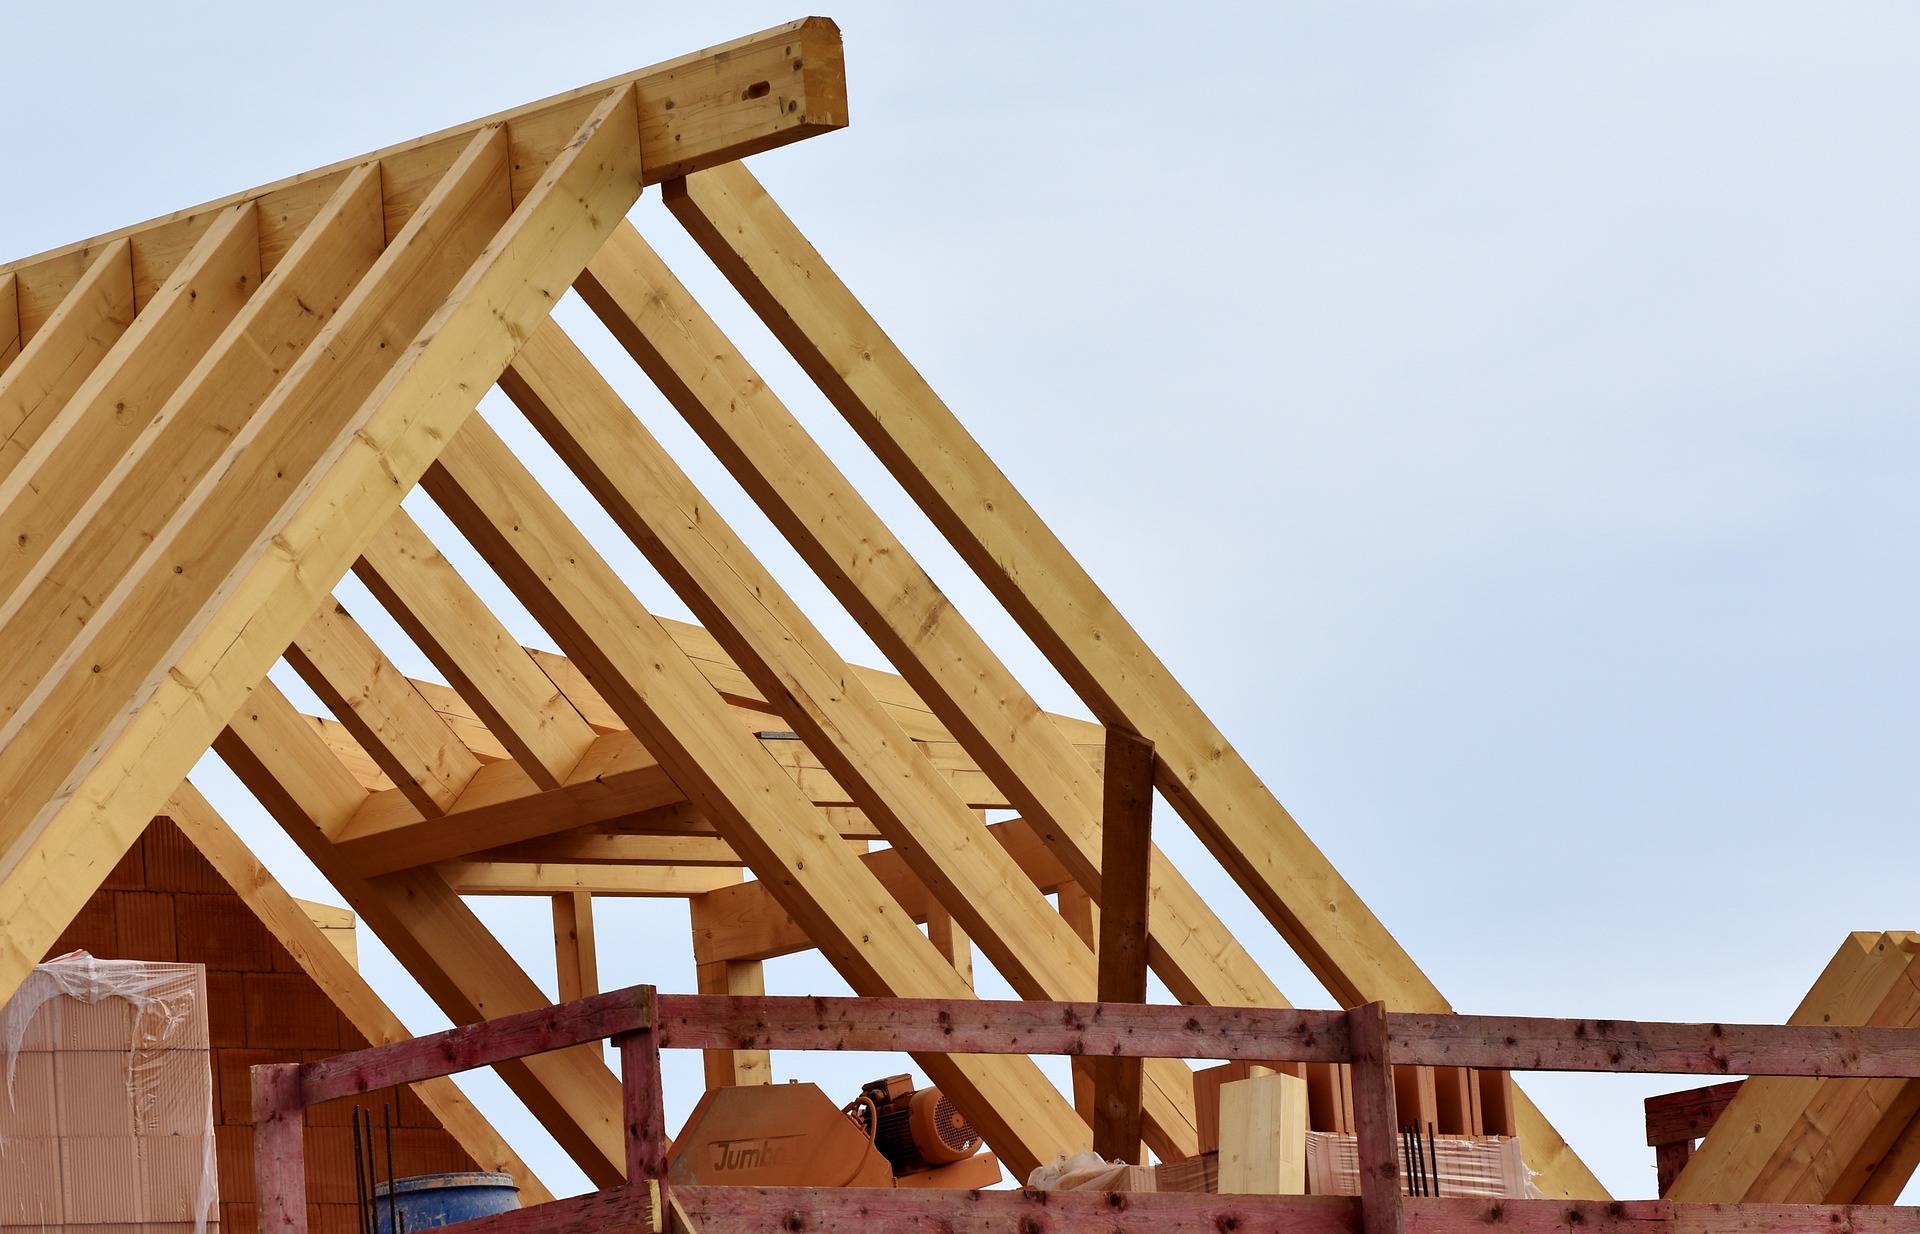 The roof of a house, with the wooden beams, and without the completed roof materials in place; our Conveyancing Solicitors in Preston discuss new build properties, and the pros and cons of purchasing a new home.